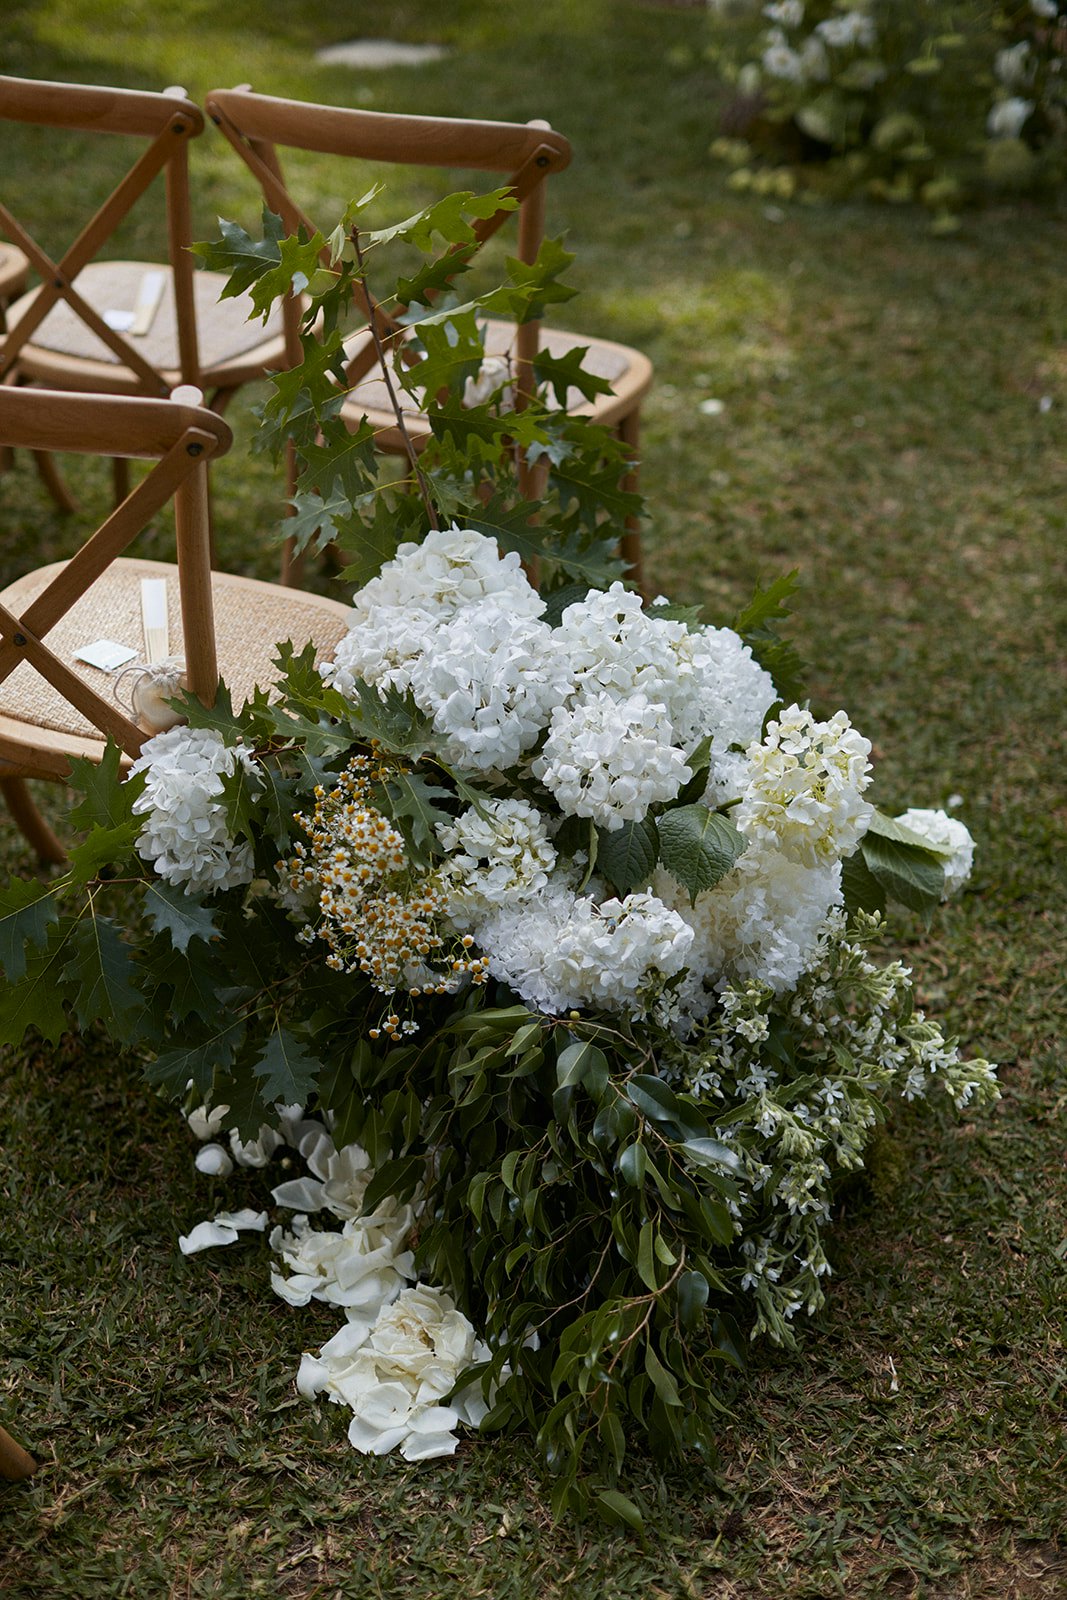 Wedding chairs with flowers by the side